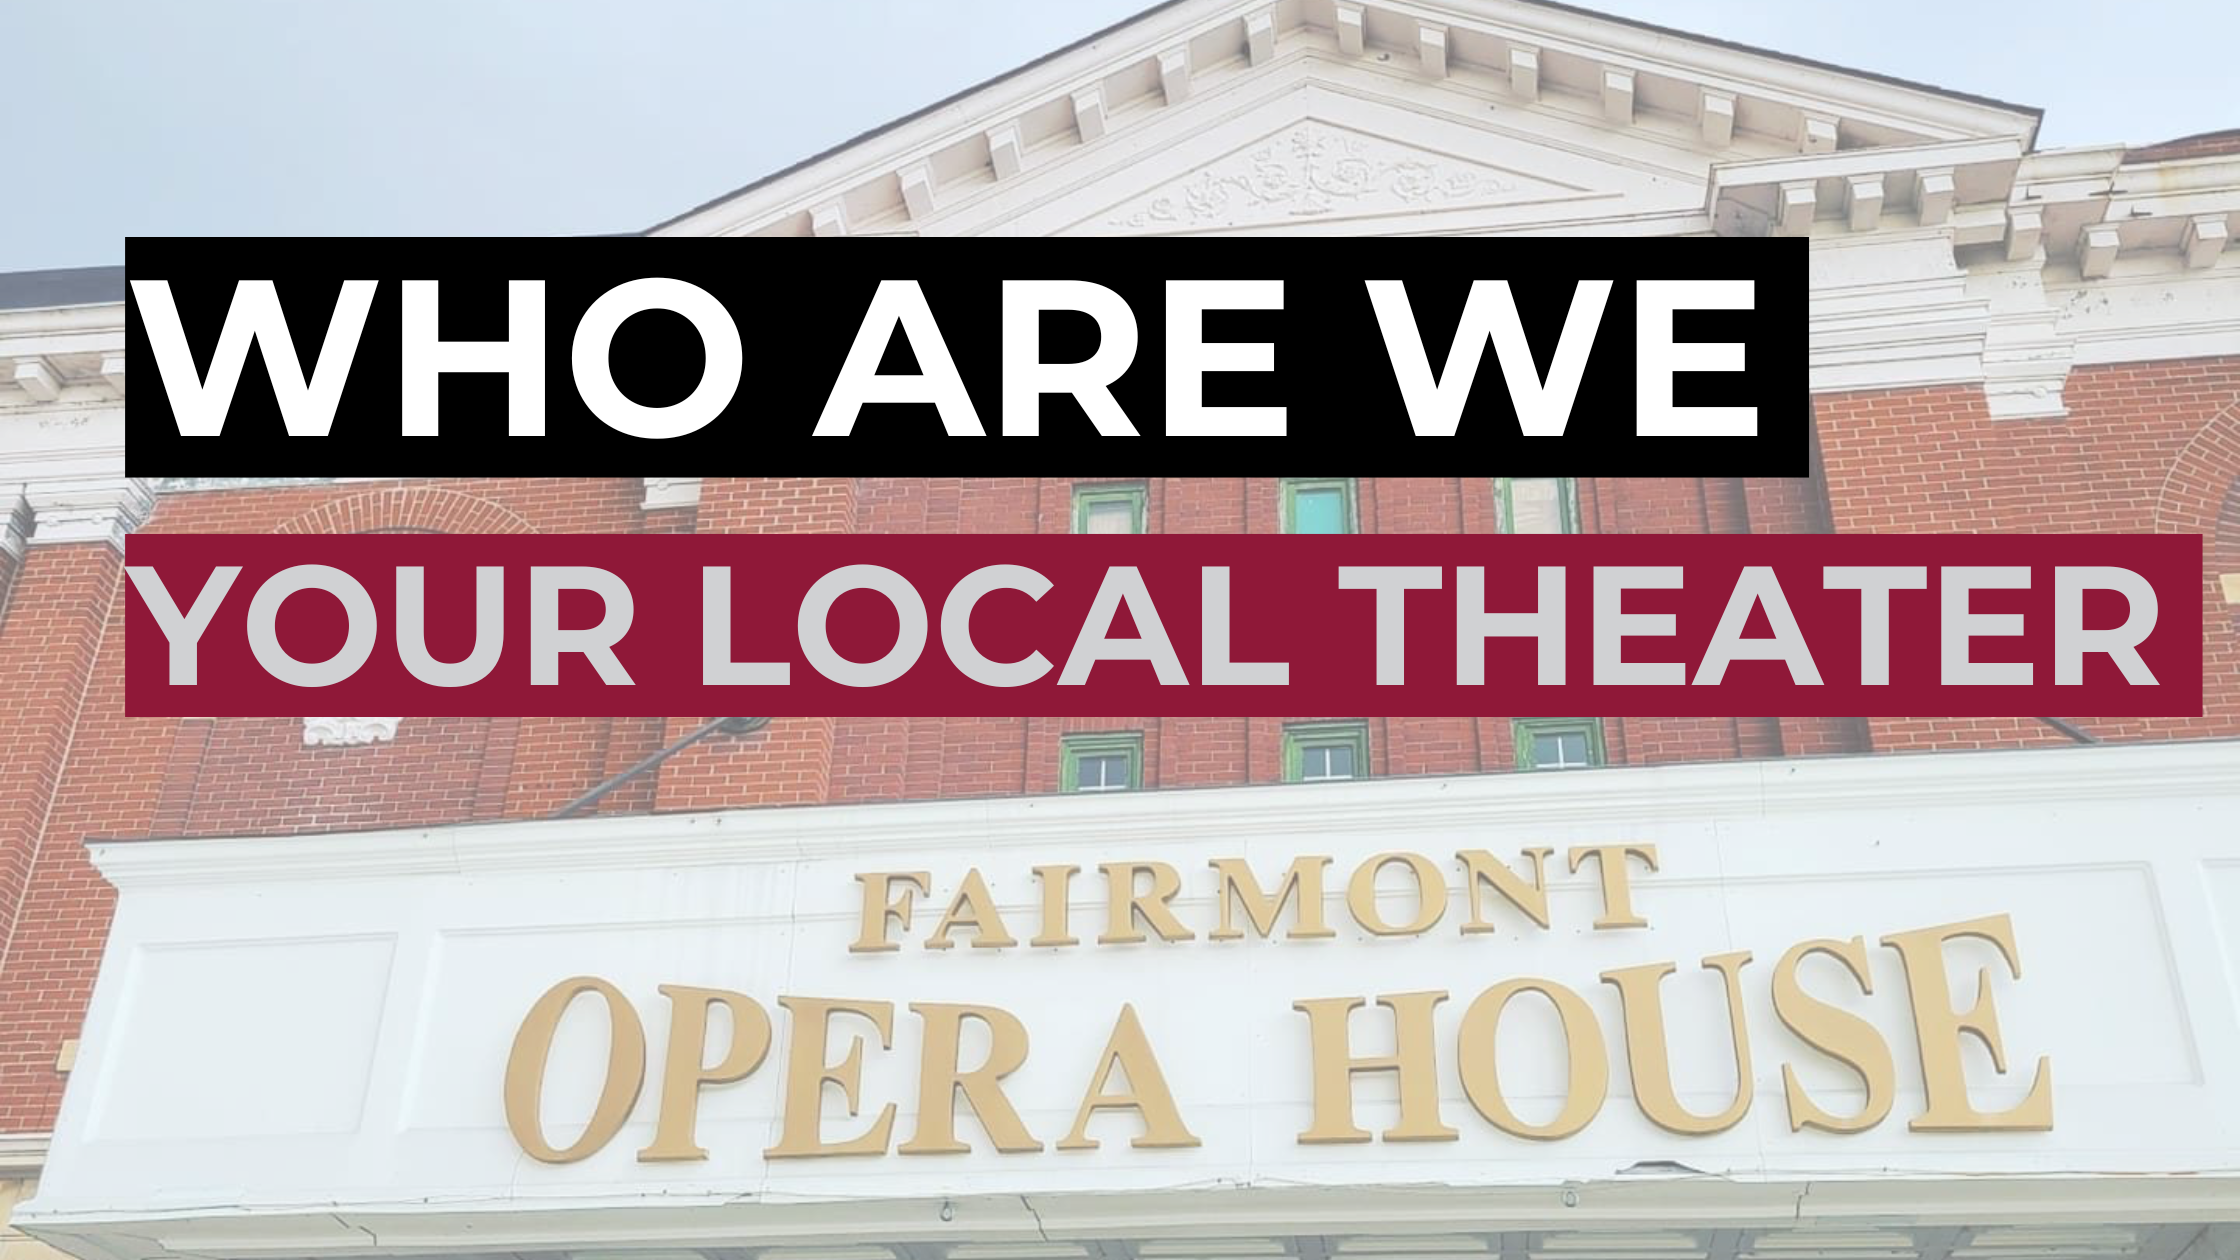 Who are we: Fairmont Opera House Local theater